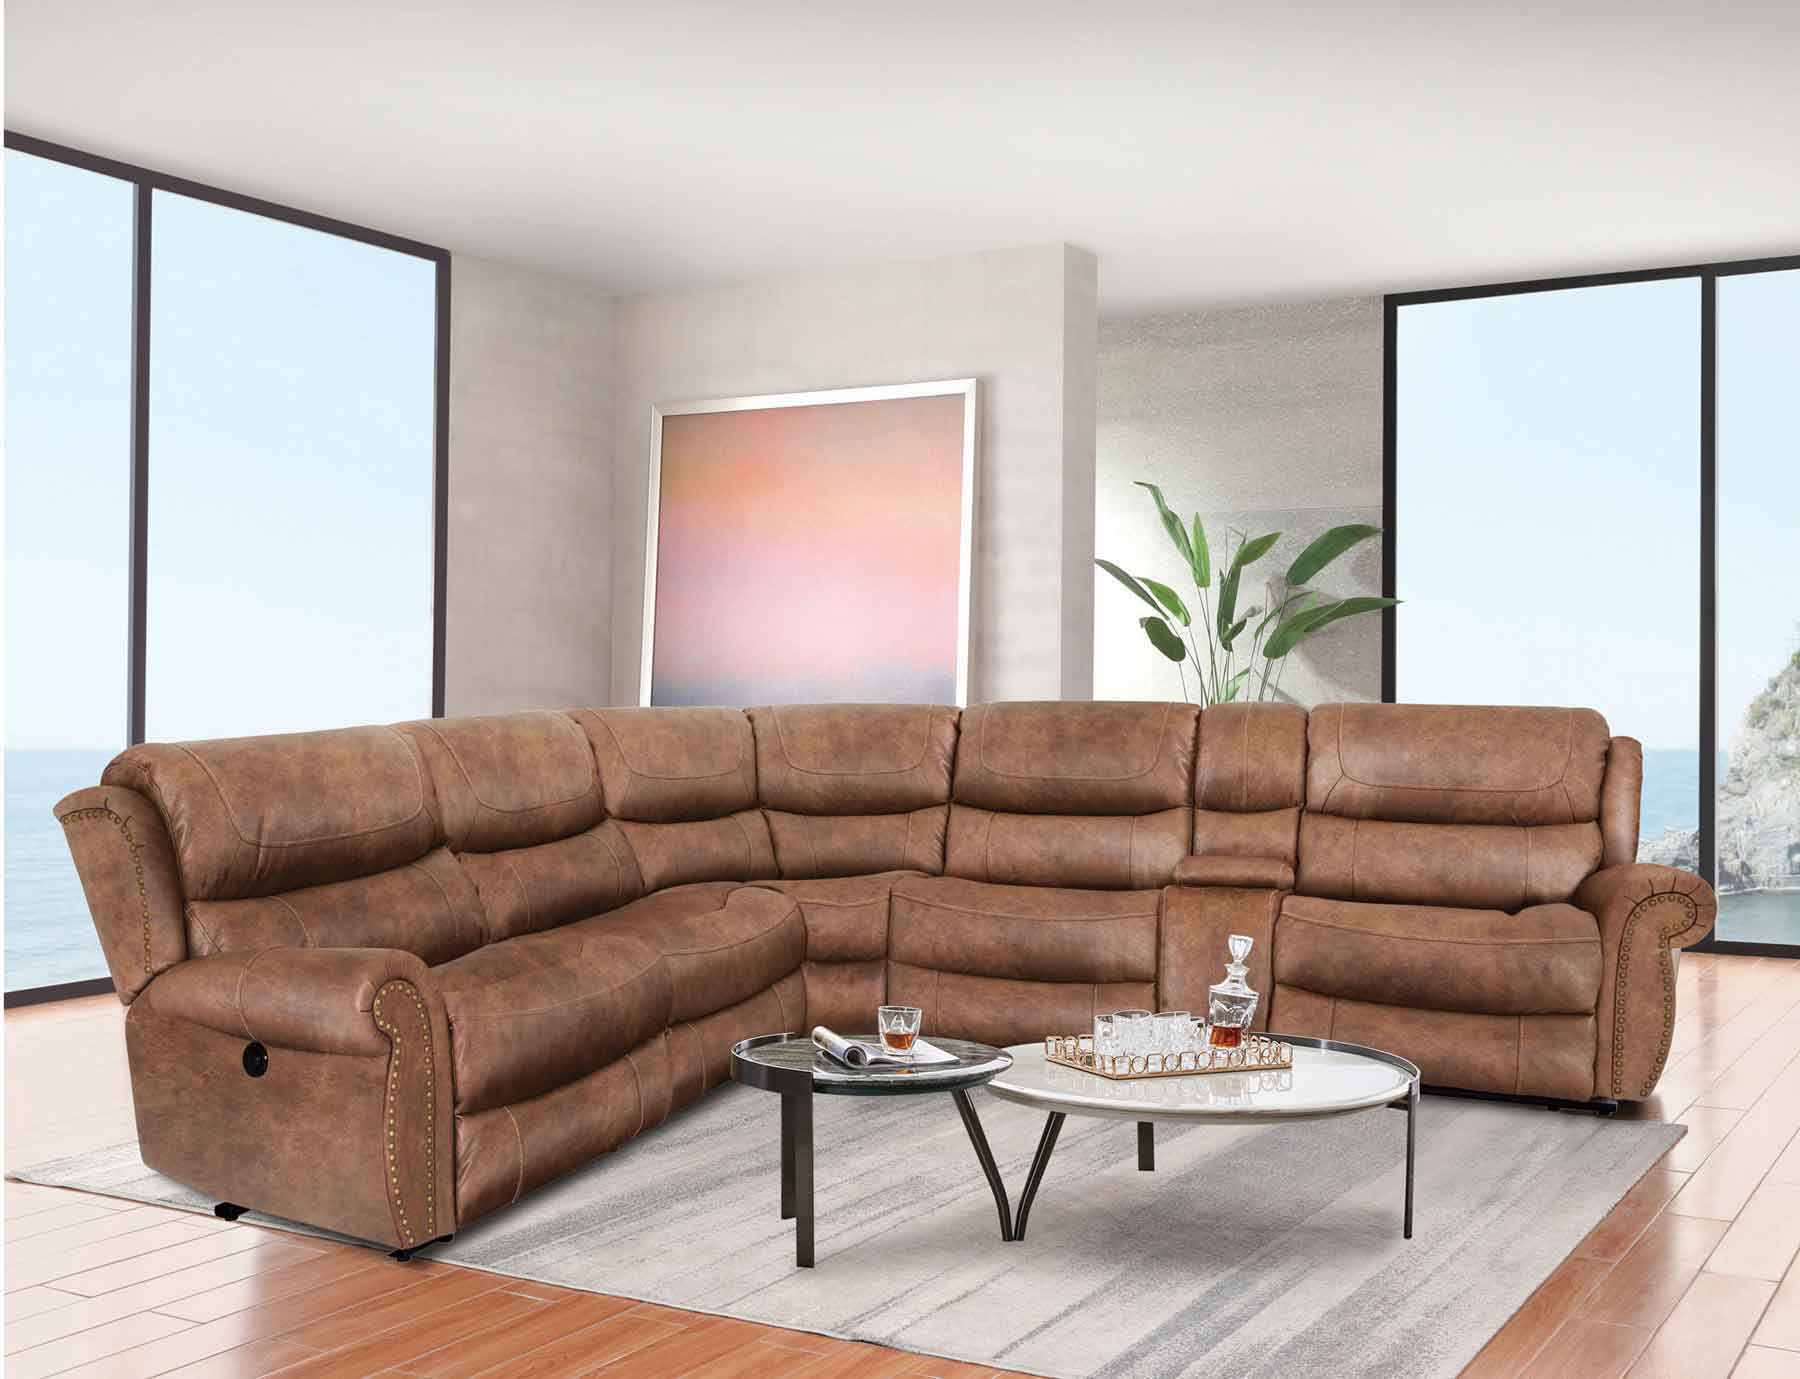 Features & Benefits Of The Steely Dan Sectional Product Review